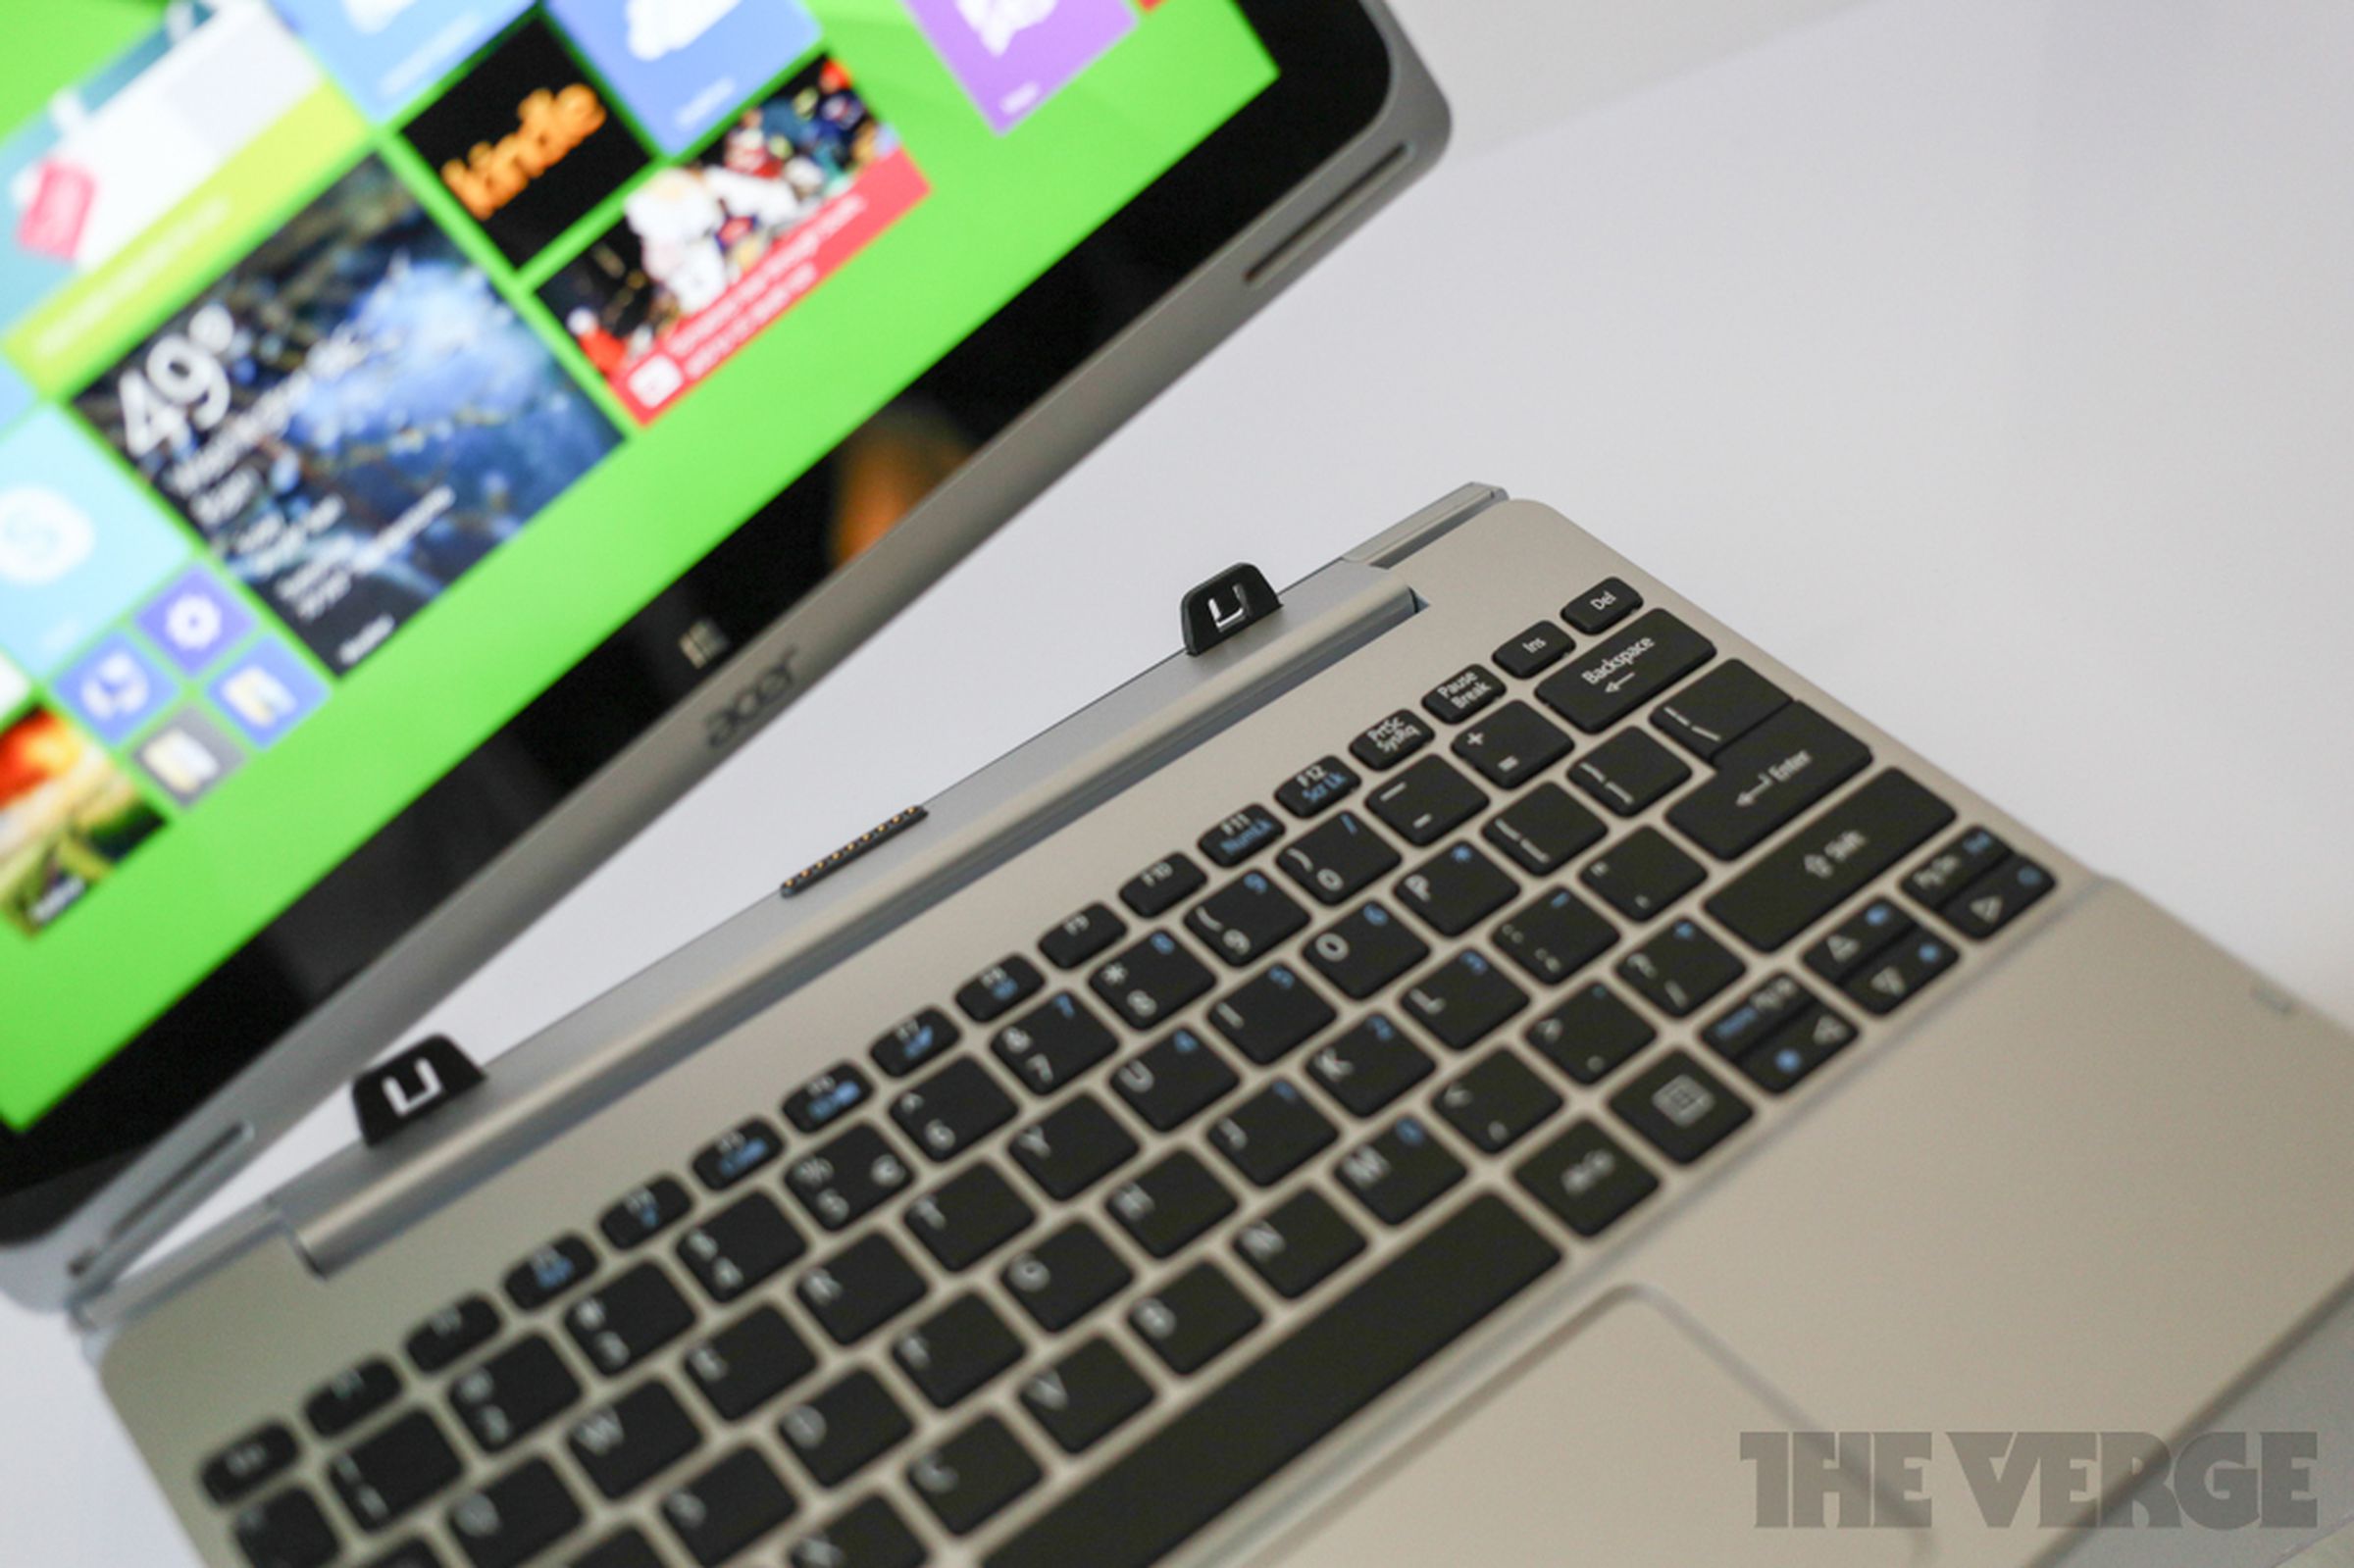 Acer Aspire Switch 10 hands-on photos